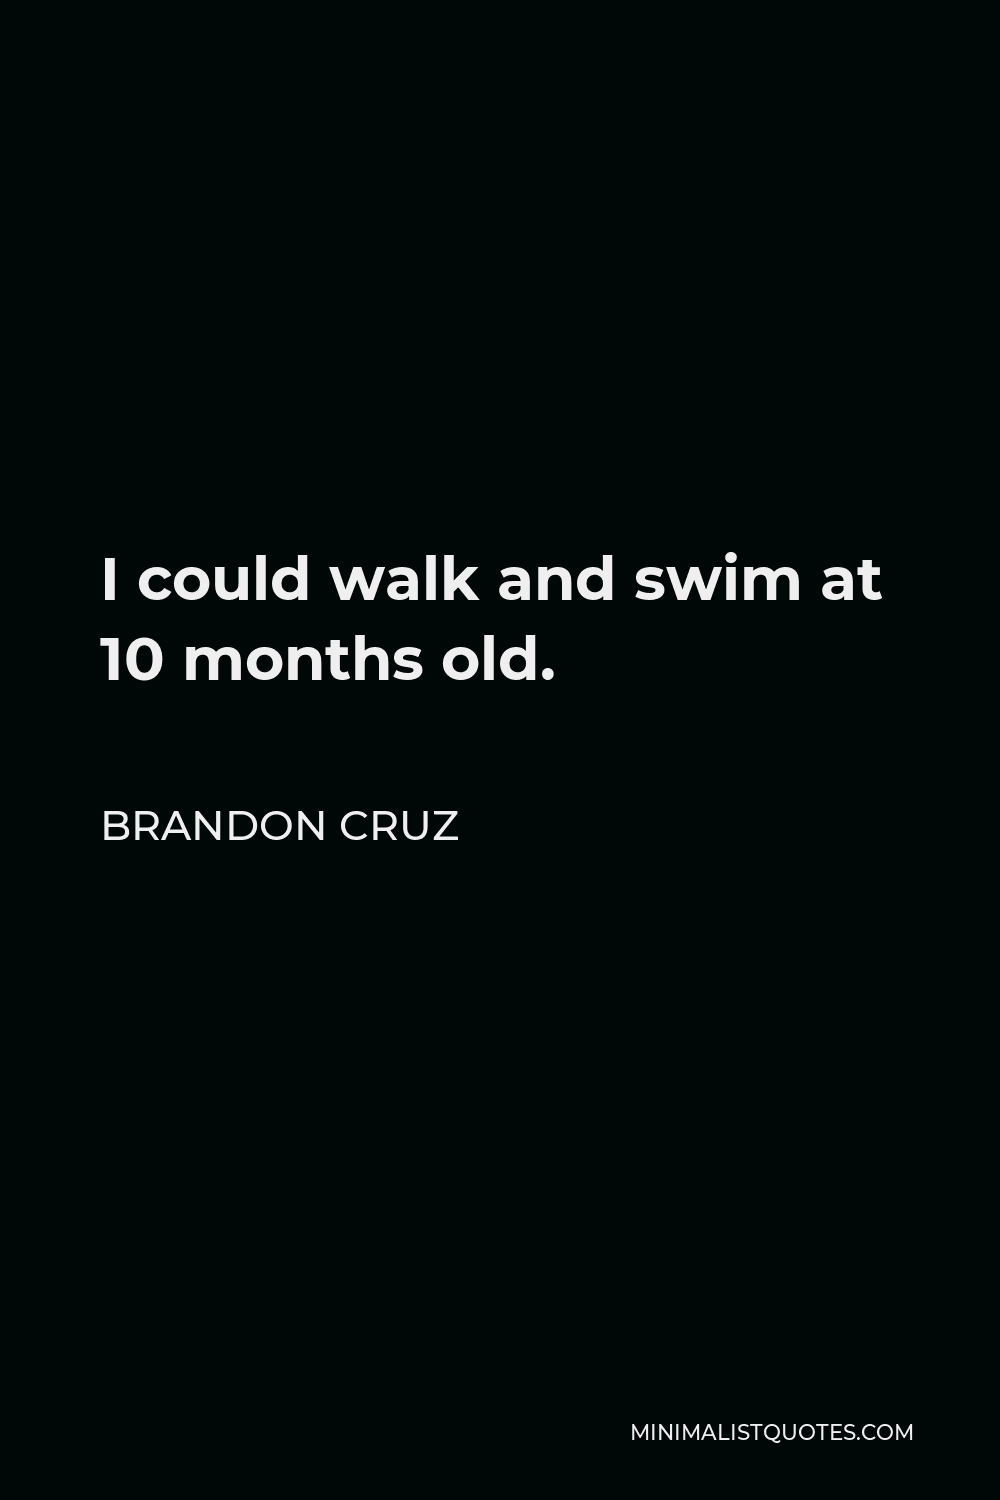 Brandon Cruz Quote - I could walk and swim at 10 months old.